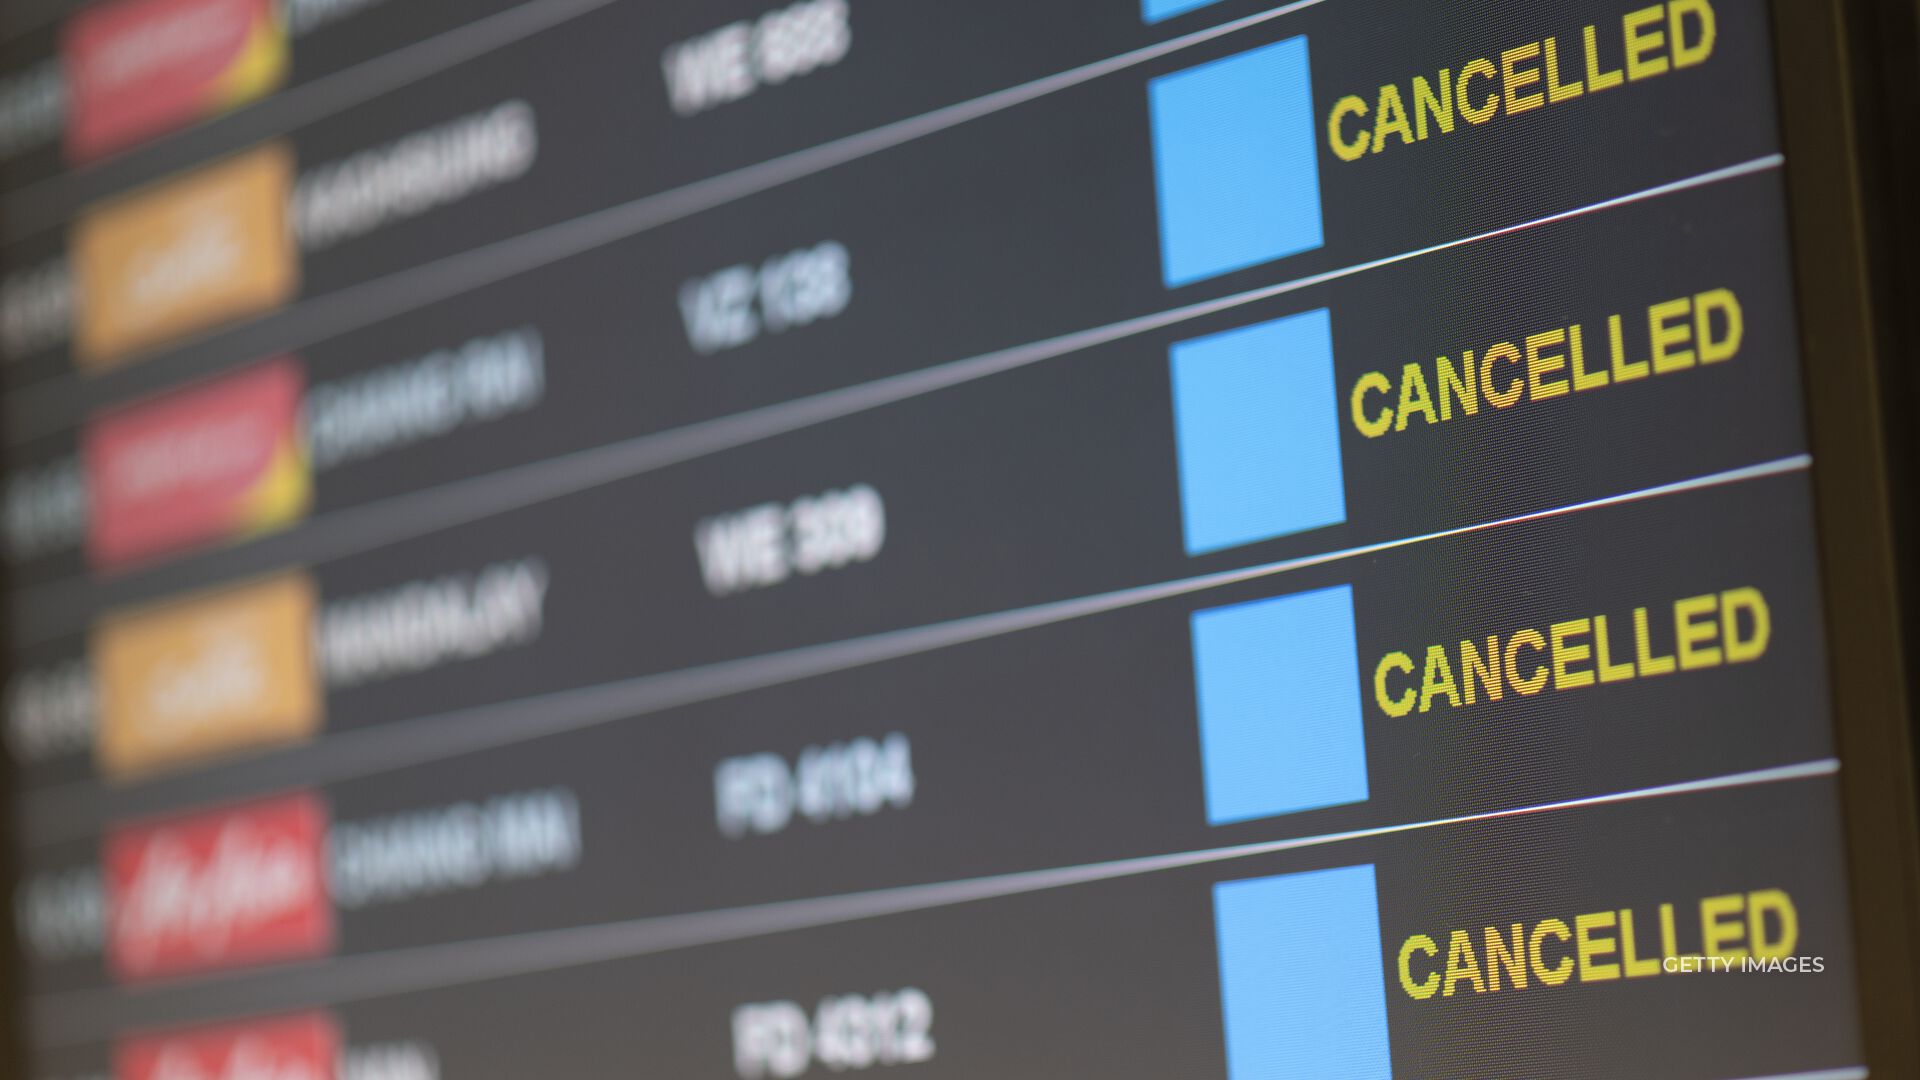 Canceled flights are leading to concerns over summer travel.